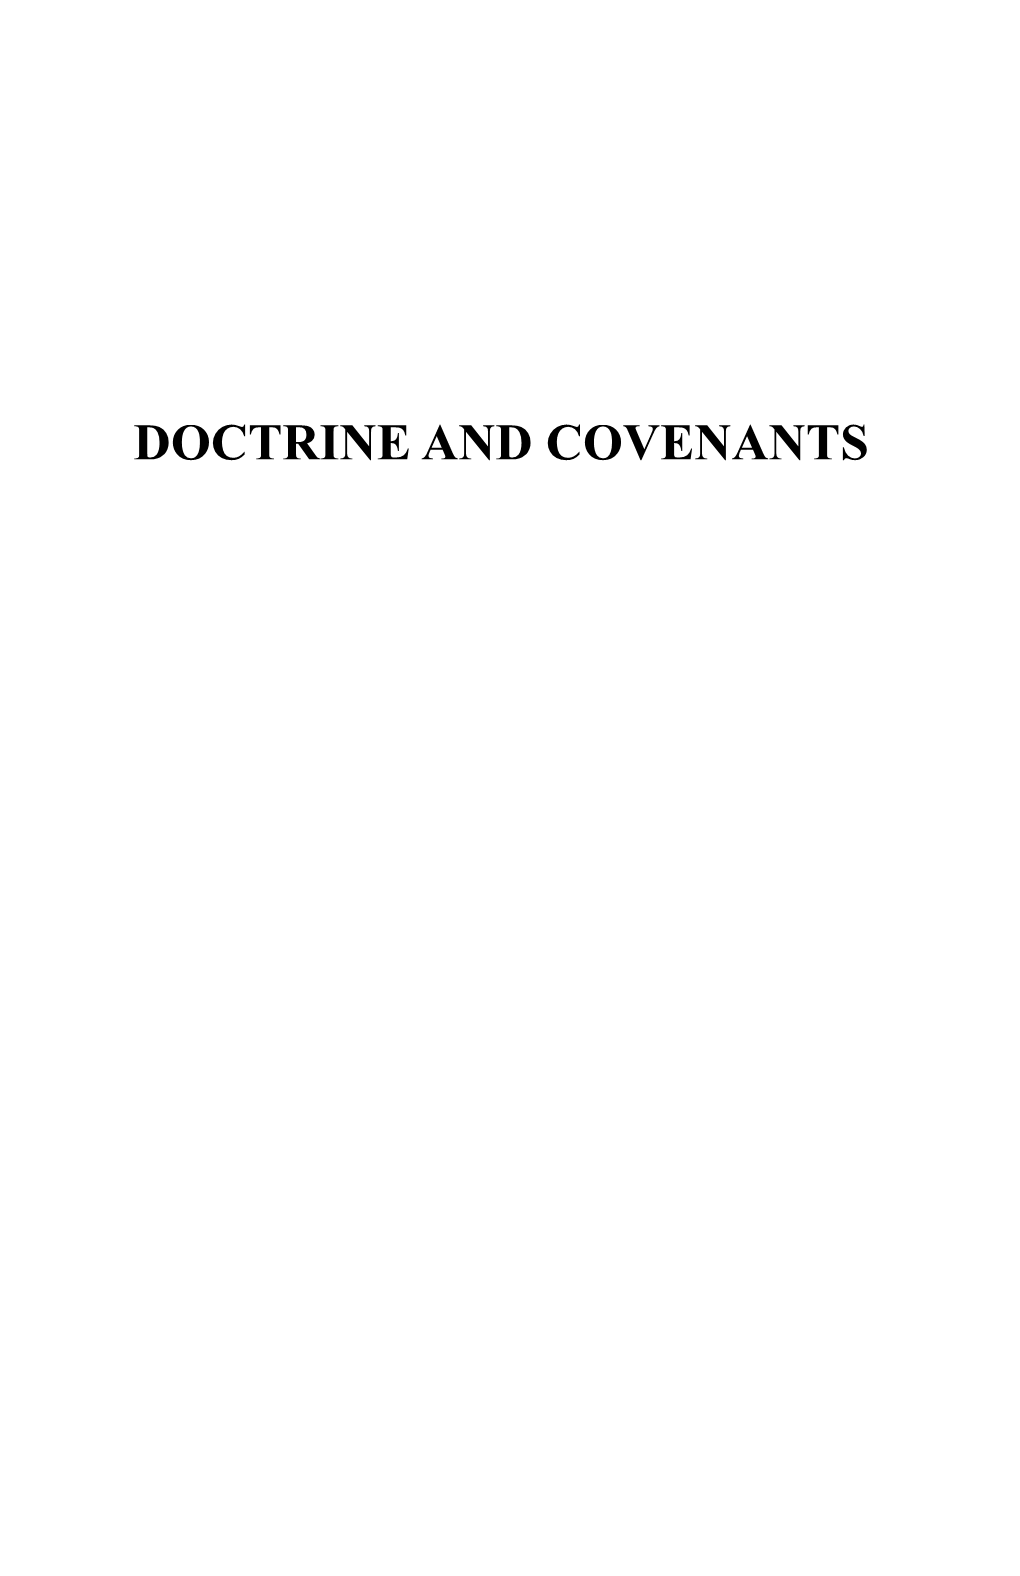 Doctrine and Covenants Section 1